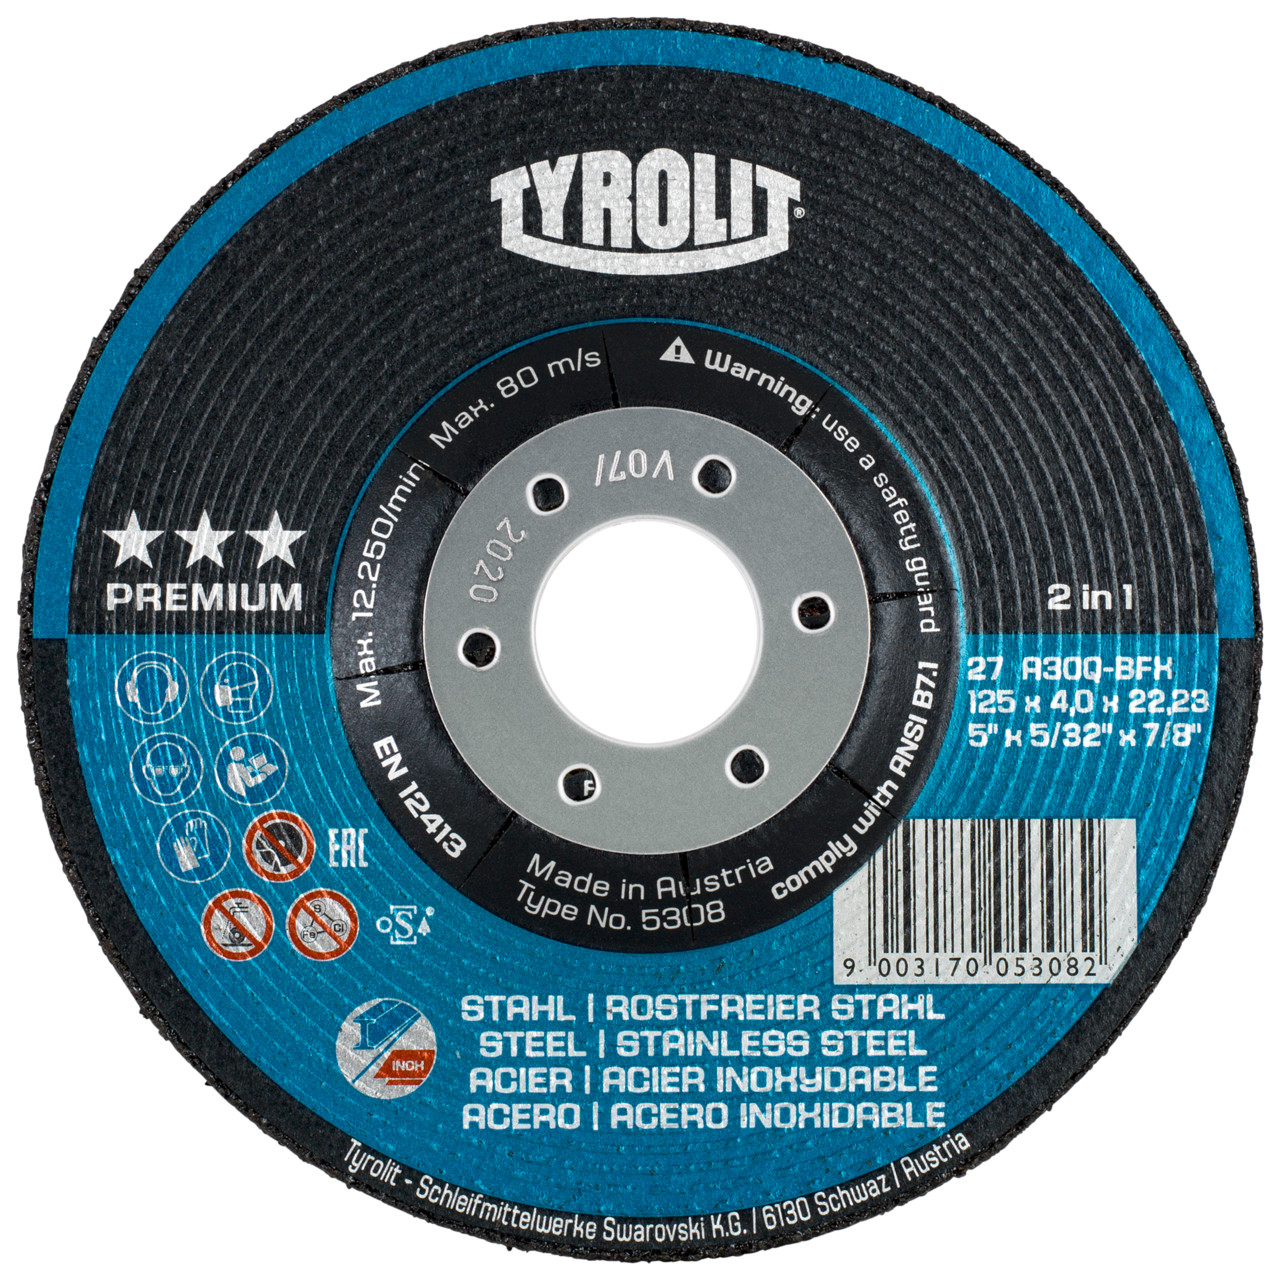 Tyrolit Roughing disc DxUxH 178x7x22.23 2in1 for steel and stainless steel, shape: 27 - offset version, Art. 34046133